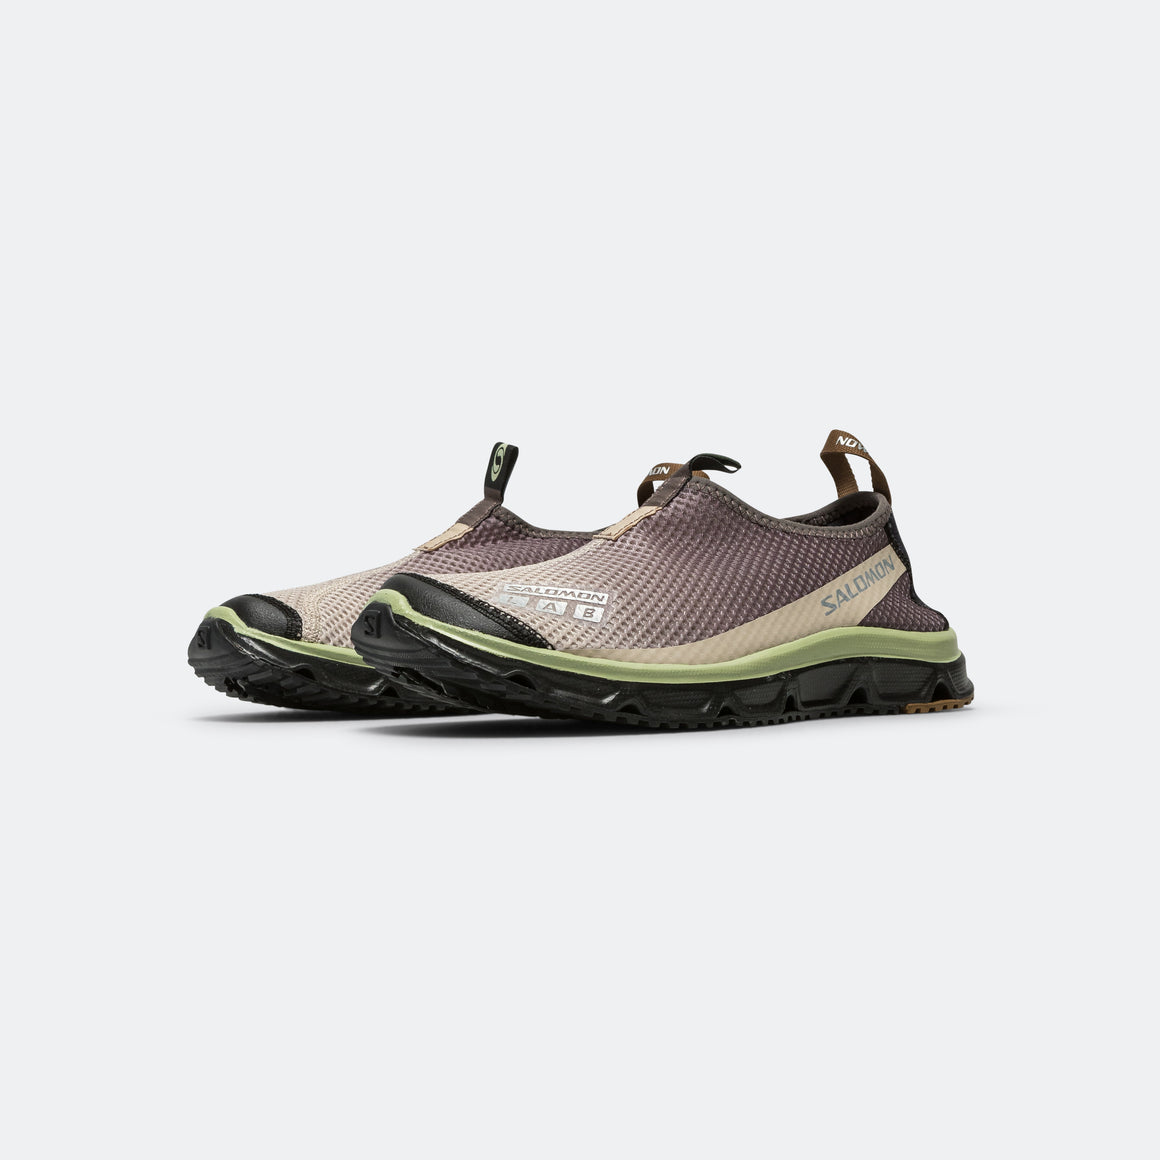 Salomon - RX Moc 3.0 - Feather Grey/Plum Kitten-Winter Pear - UP THERE